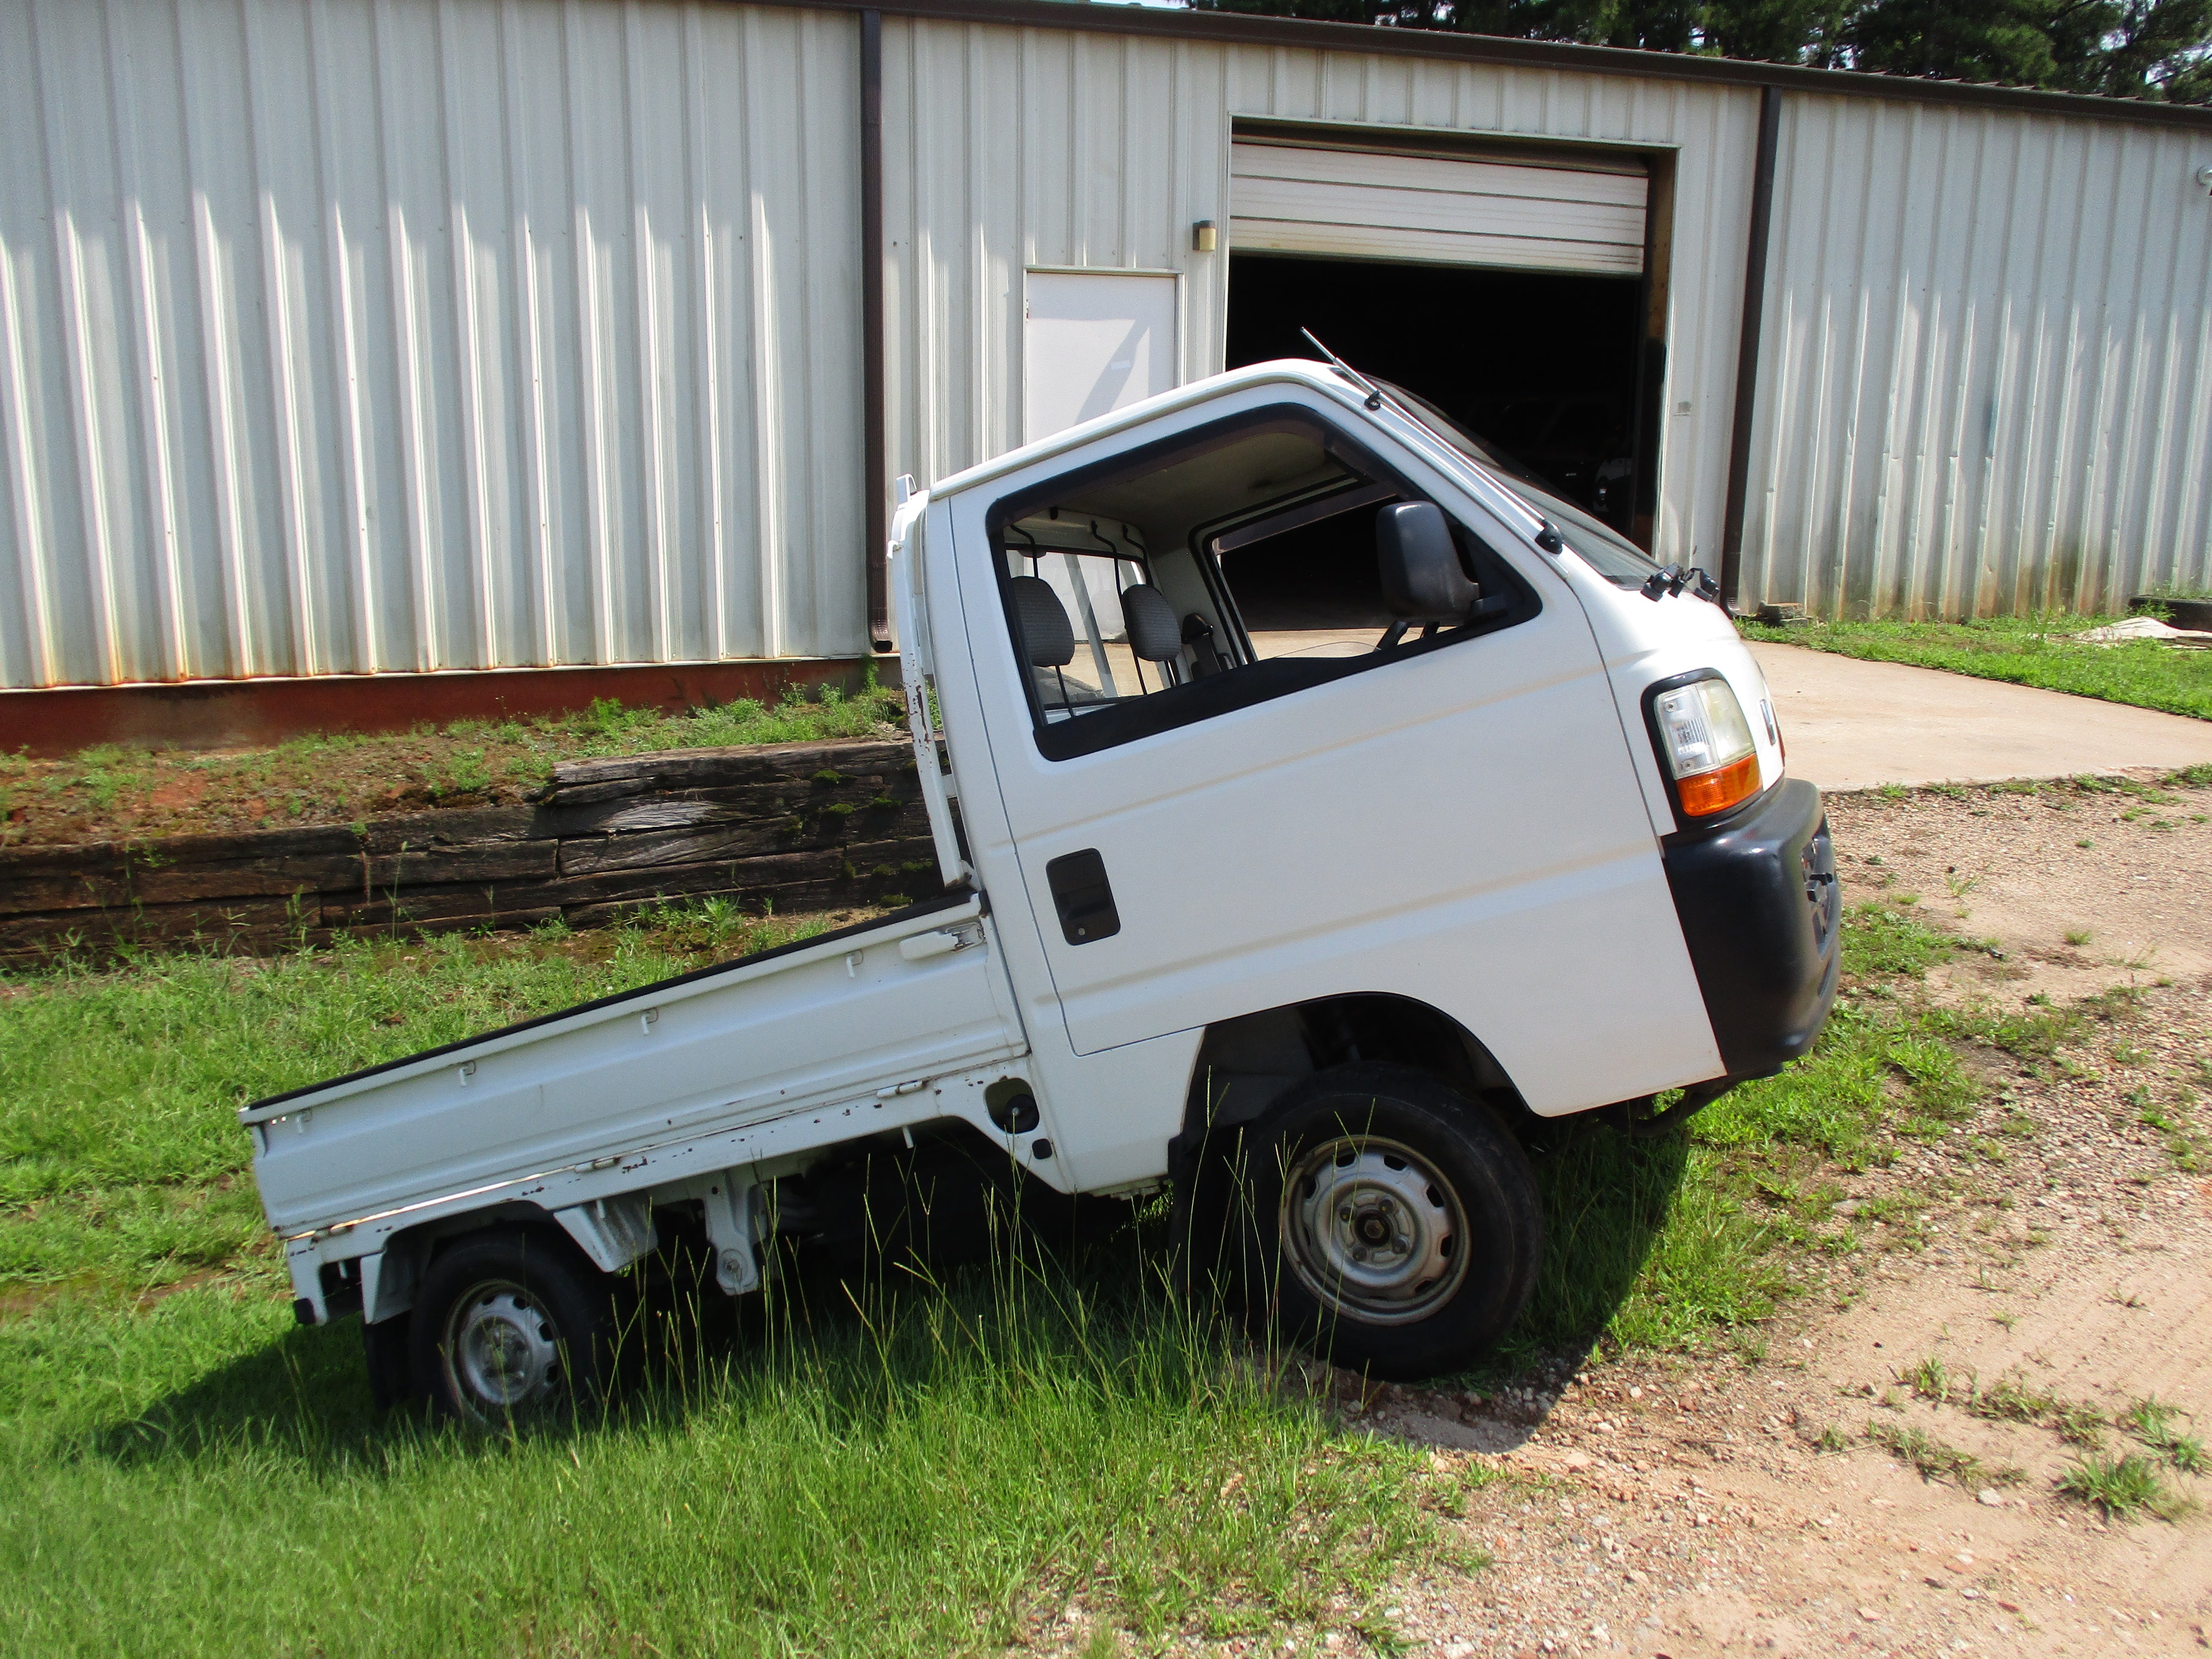 JDM 94 Honda Acty SDX Real Time 4WD Mini Truck 5 Speed Manual